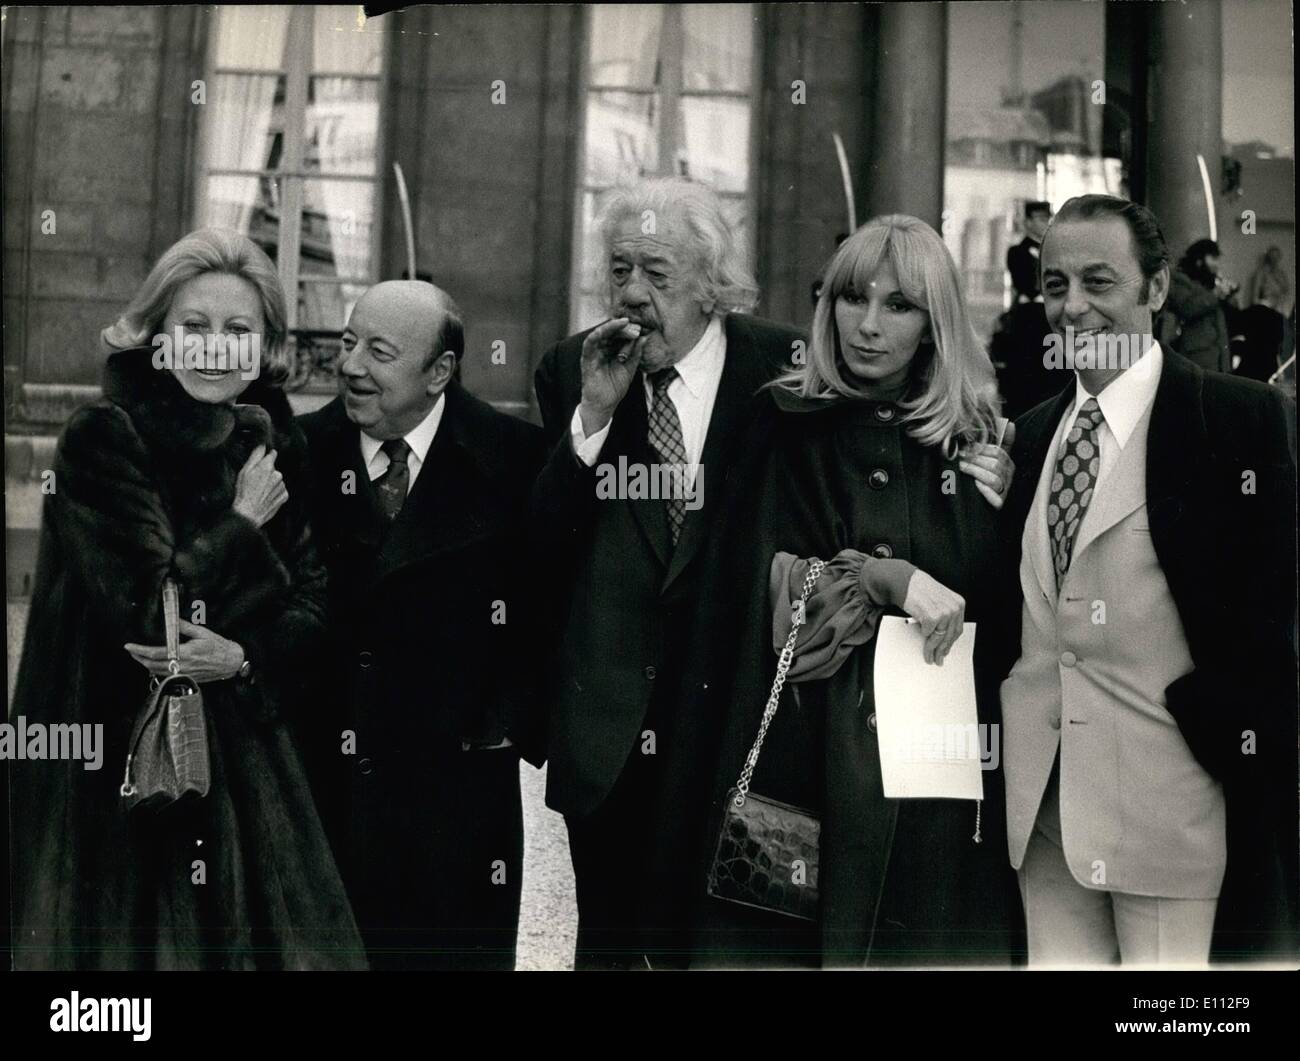 Feb. 02, 1975 - President Giscard d'Estaing gave director Marcel Carne permission to film at the Elysee Palace. Left to right: Michele Morgan, Marcel Carne, Michel Simon, Dany Savac, and Roland Lesaffre. American Speaker of the House, W. Martin, in Germany. Stock Photo